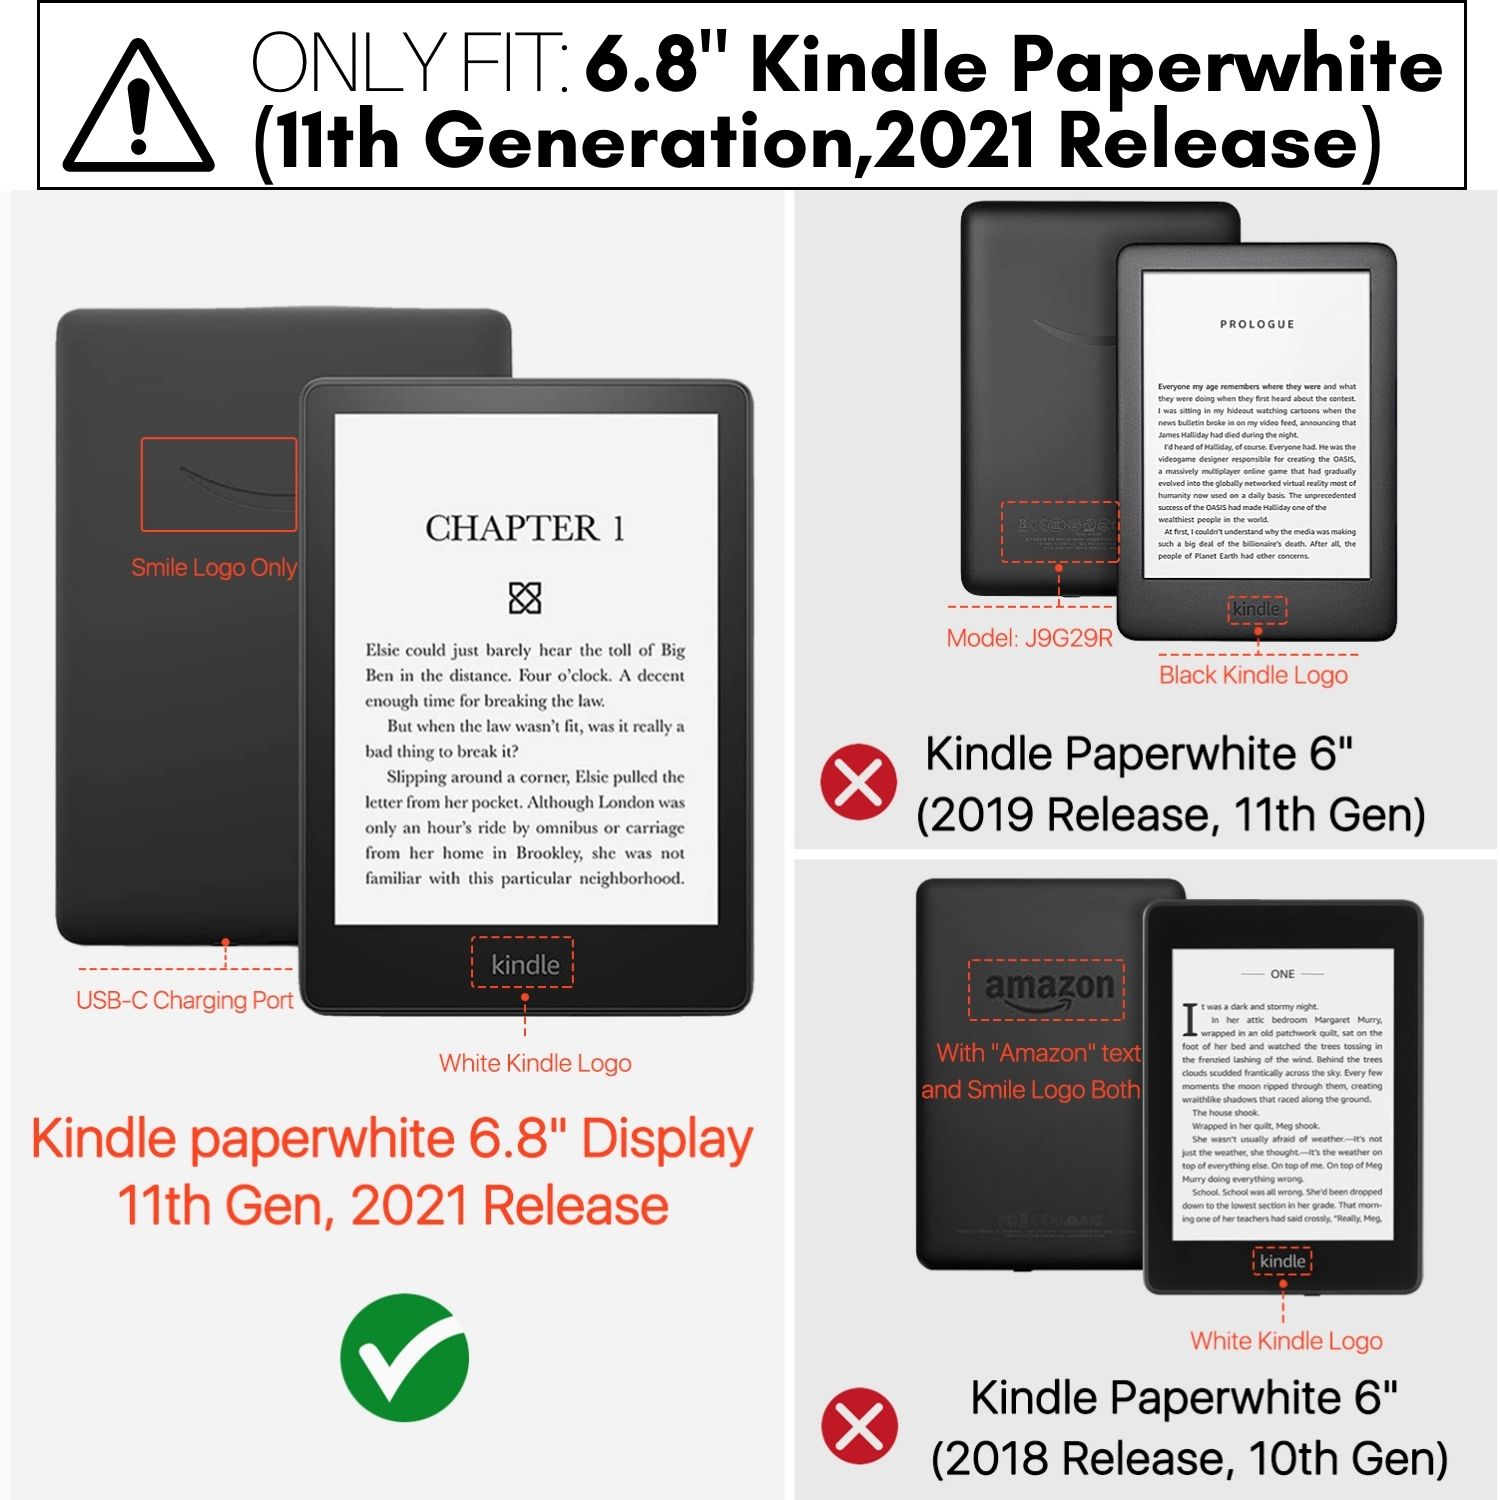 Designed For Kindle Paperwhite 2021 - Perfect fit for Amazon All-New 6.8" Kindle Paperwhite and Kindle Paperwhite Signature Edition E-Reader (11th Generation - 2021 Release). Will not fit older generation Kindle models